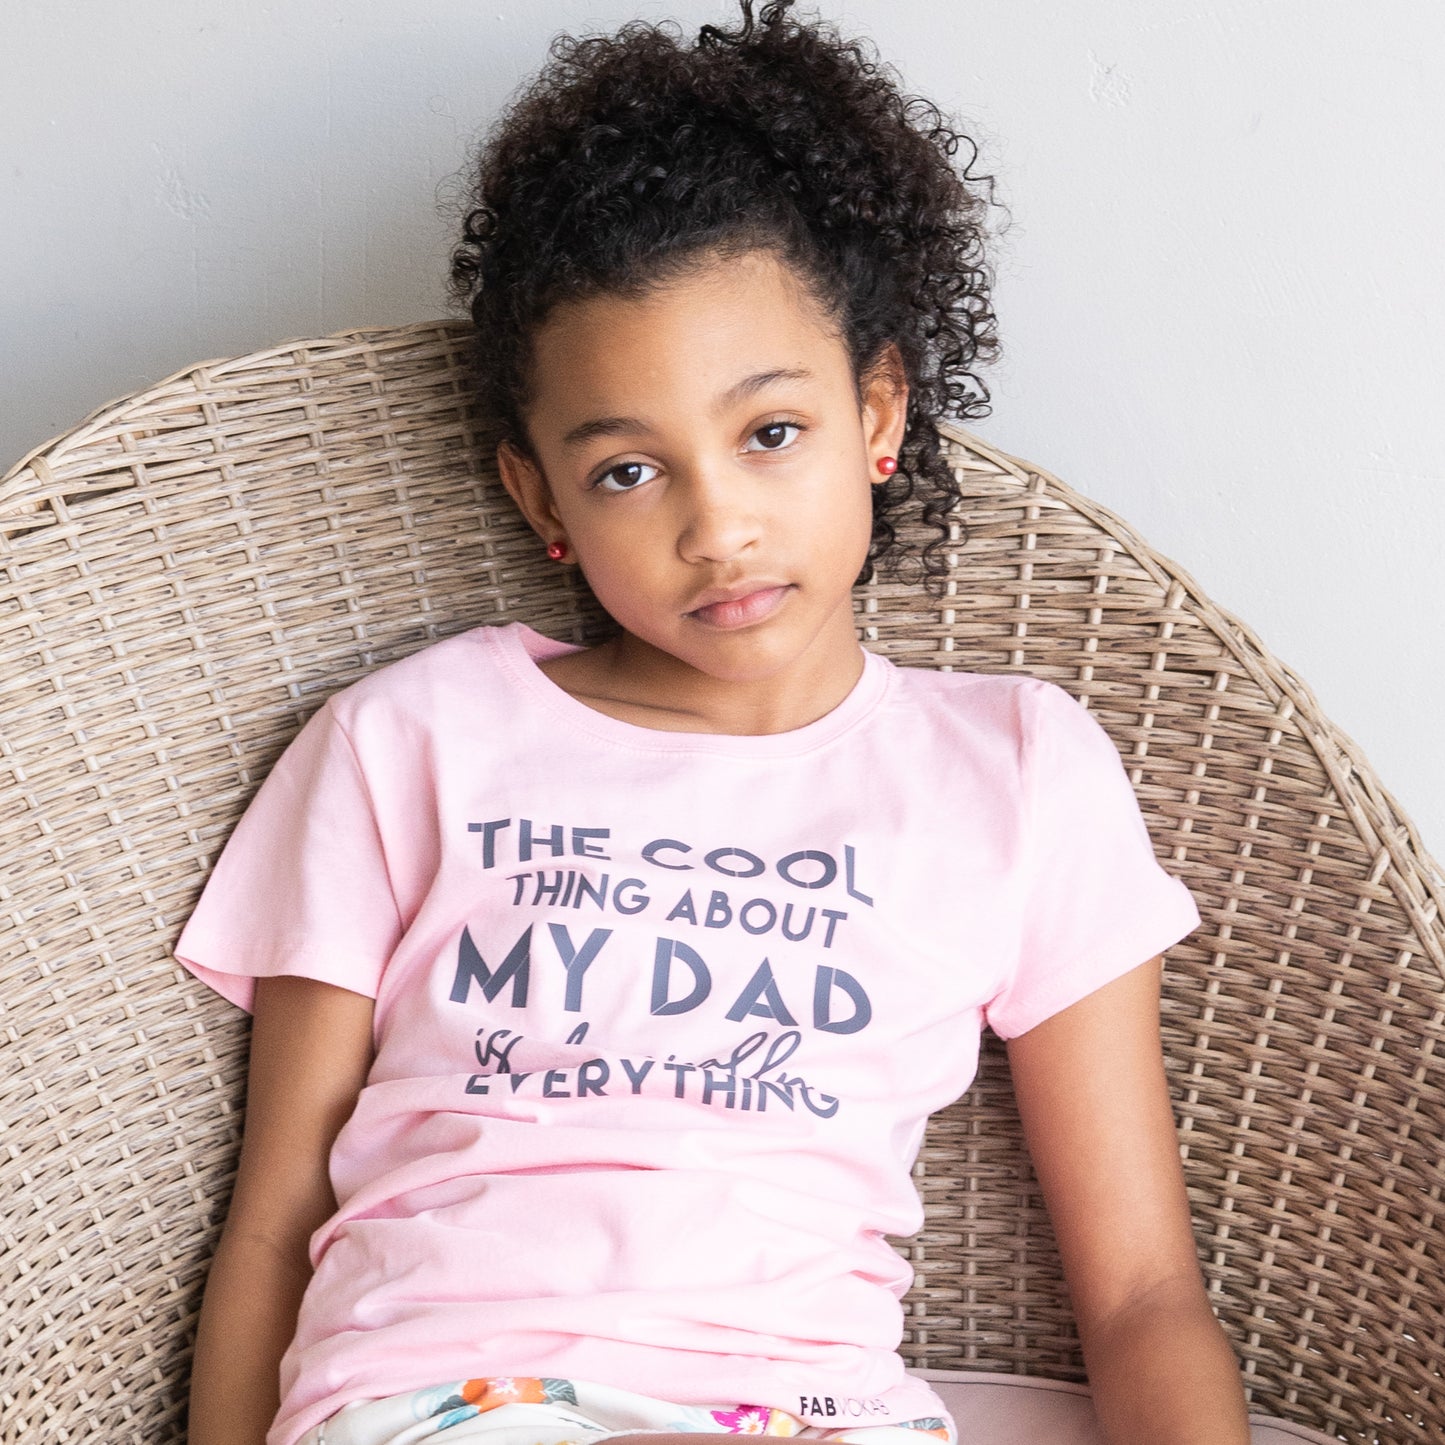 "The Cool Thing About My Dad" Kids Short Sleeve T-Shirt